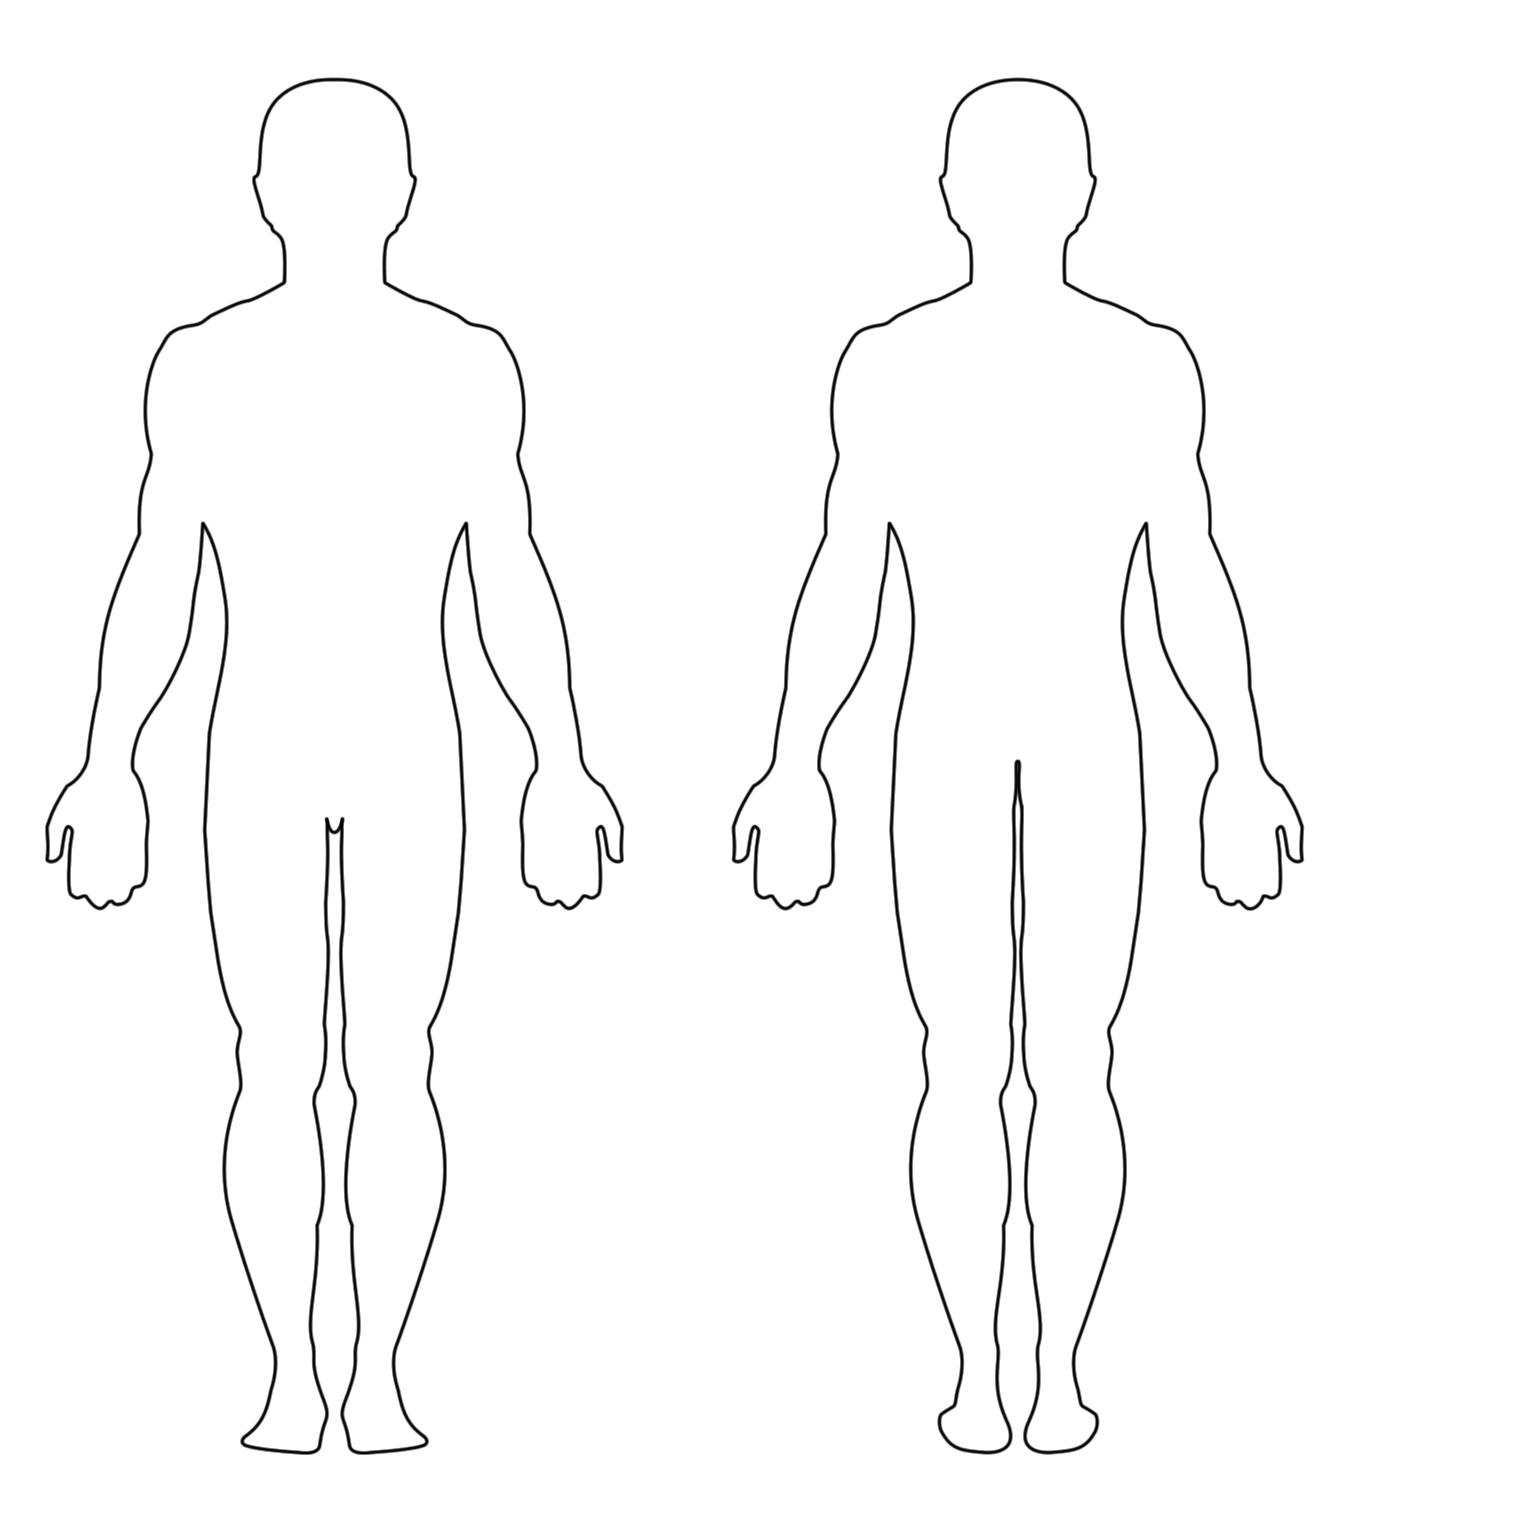 Free Human Body Outline Png, Download Free Human Body Outline Png png